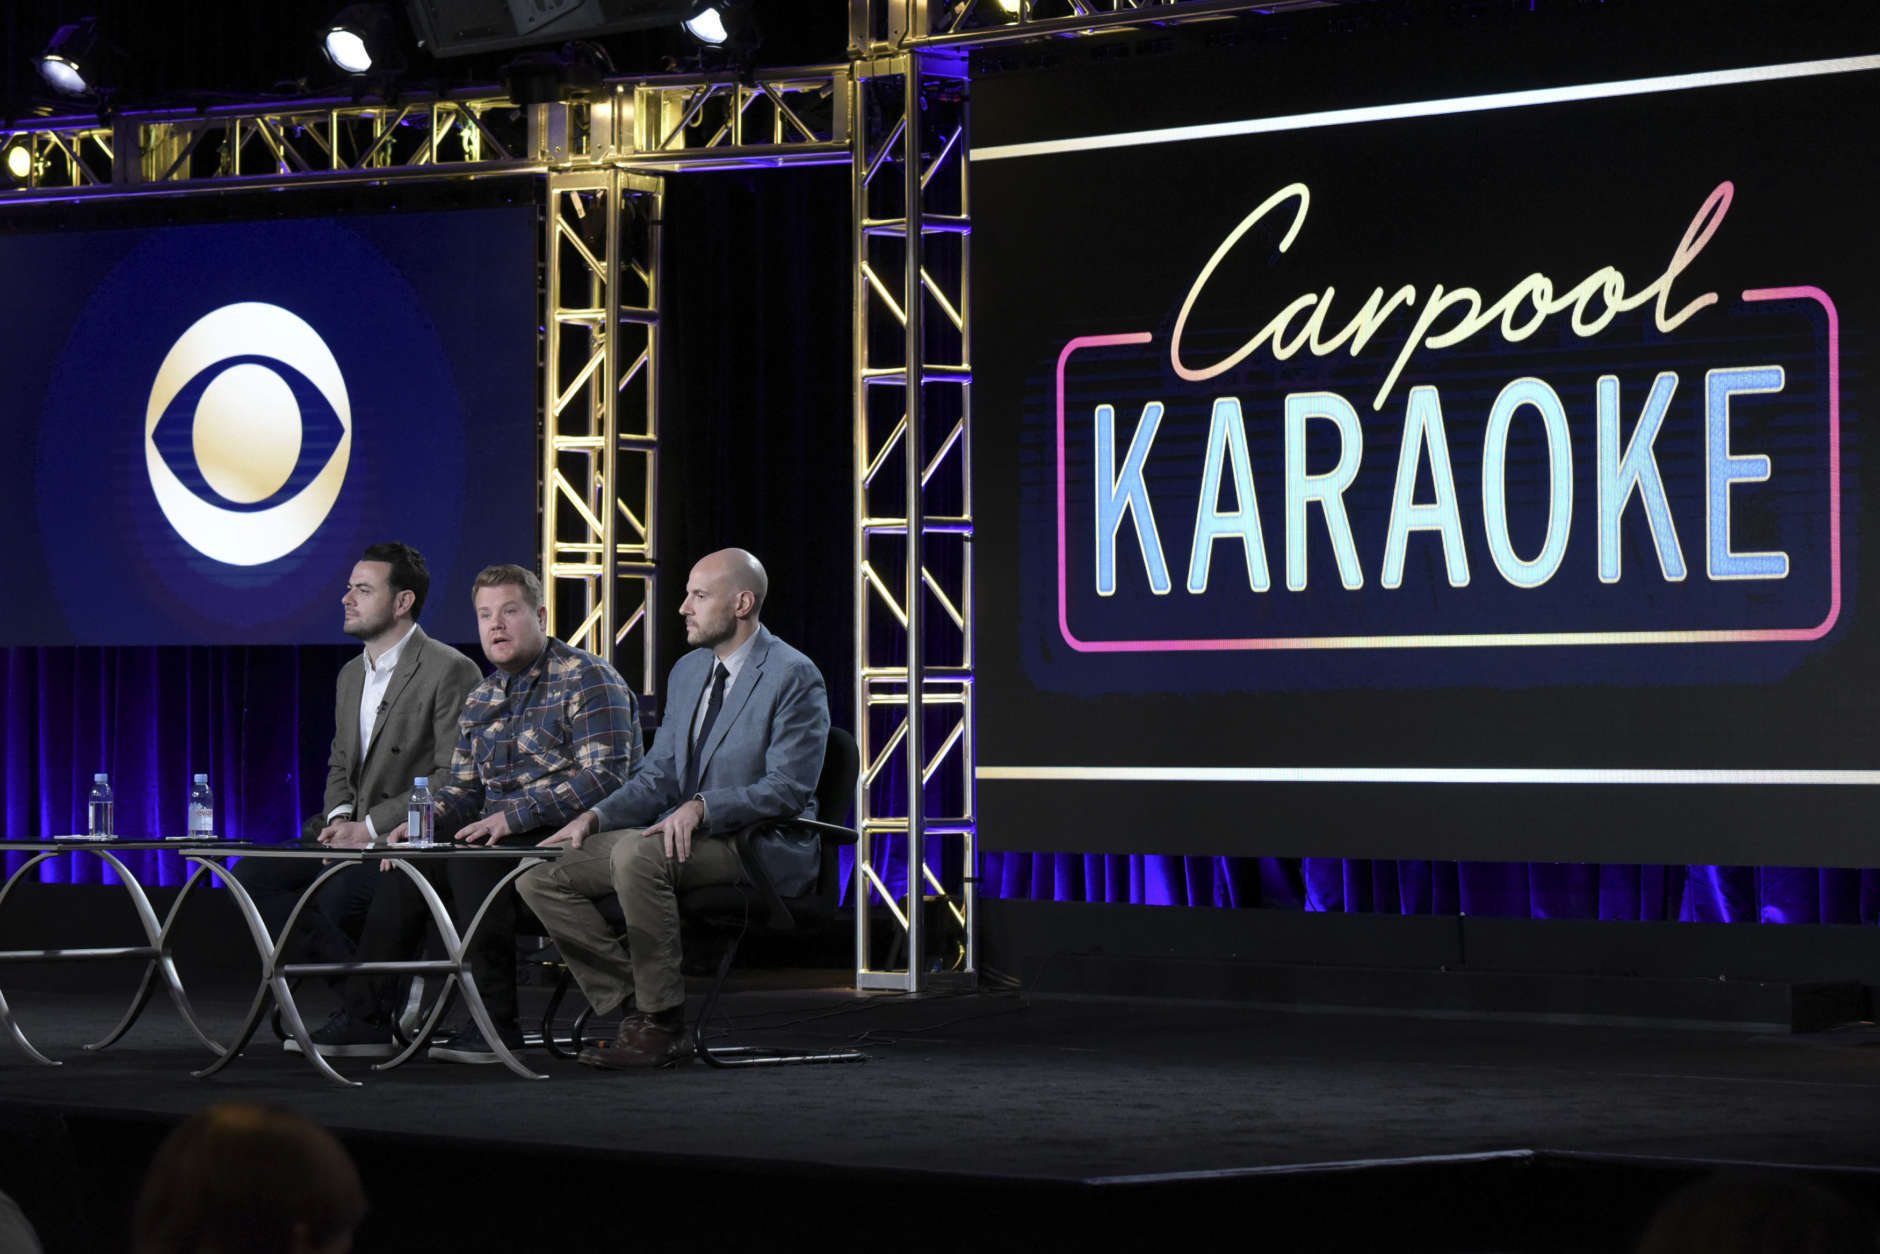 Ben Winston, from left, James Corden and Eric Pankowski attend "Carpool Karaoke (series for Apple Music)" panel at The CBS portion of the 2017 Winter Television Critics Association press tour on Monday, Jan. 9, 2017, in Pasadena, Calif. (Photo by Richard Shotwell/Invision/AP)